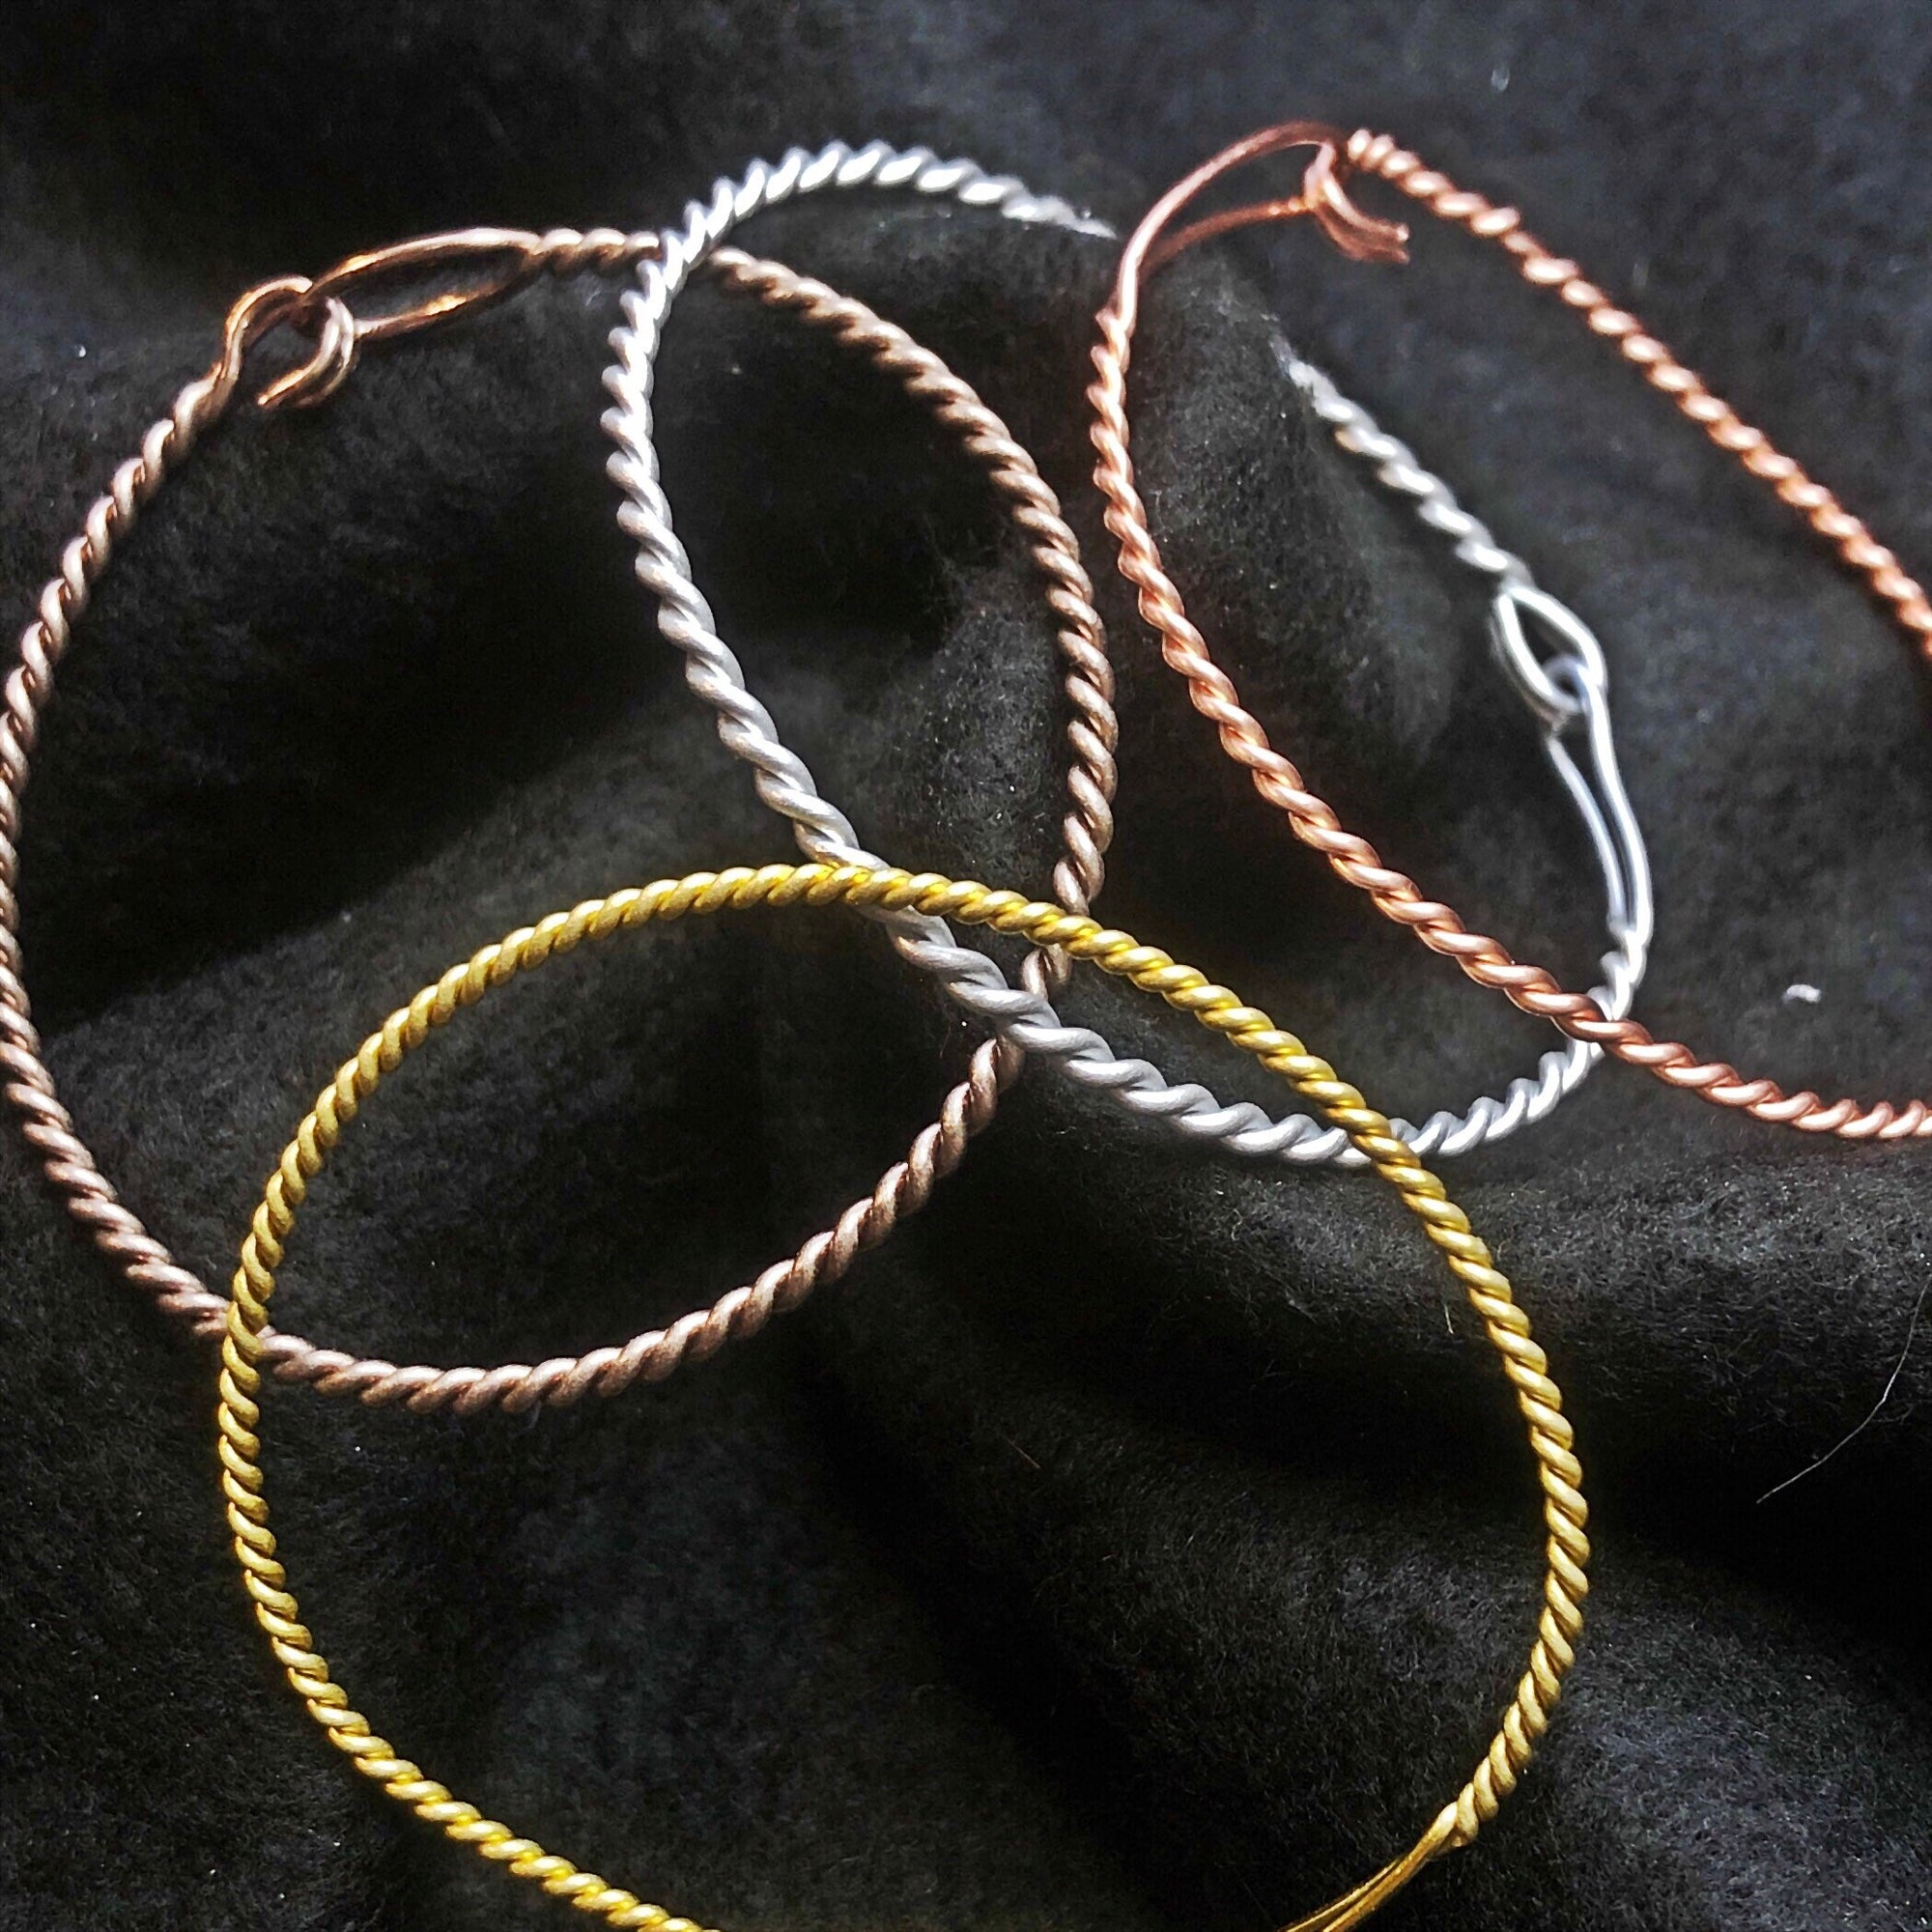 Chic and Delicate: Handmade Braided Bracelet in Silver, Gold, Rose Gold, Bronze